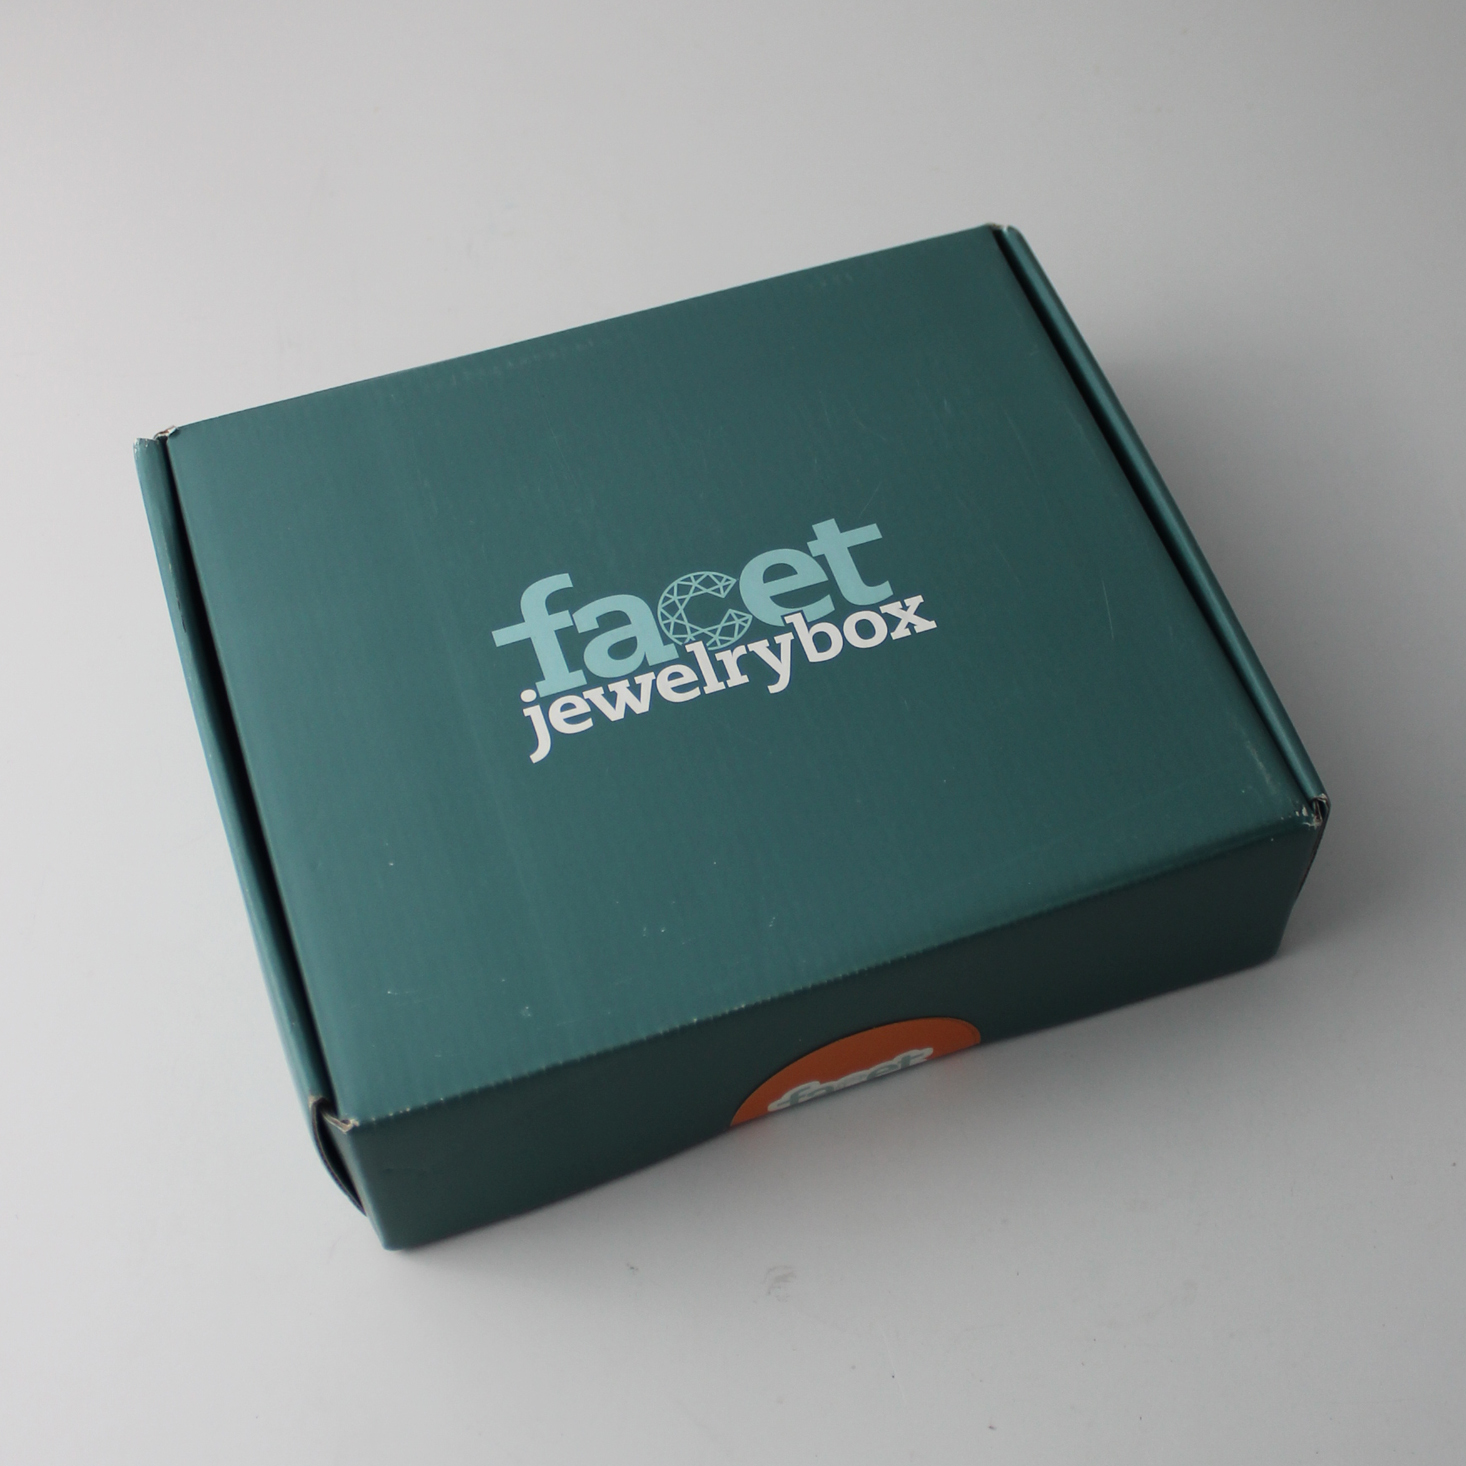 Facet Jewelry Box Bead Stitching Review + Coupon – November 2018